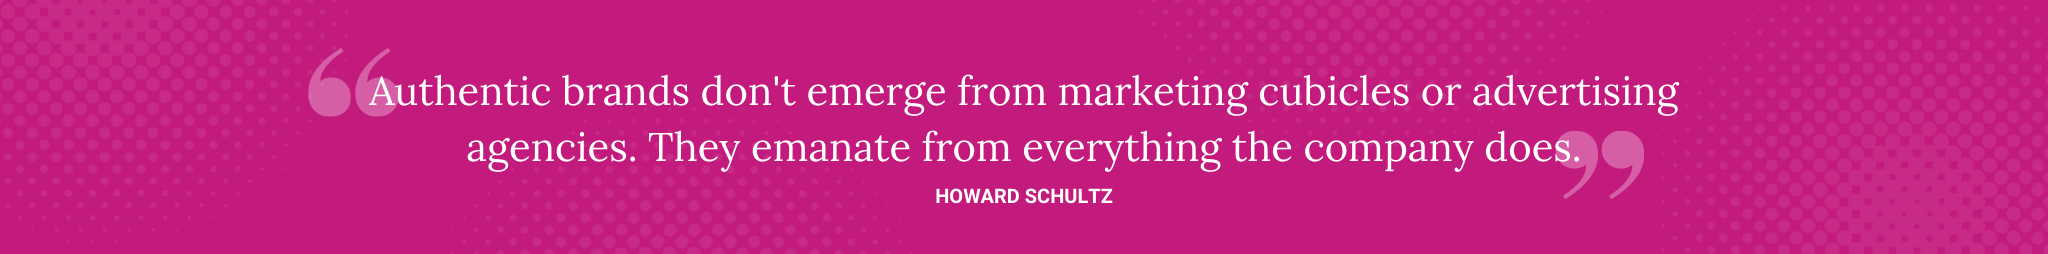 Howard Schultz Quote for 50 Customer Service Stats Quotes and Facts - Brittany Hodak